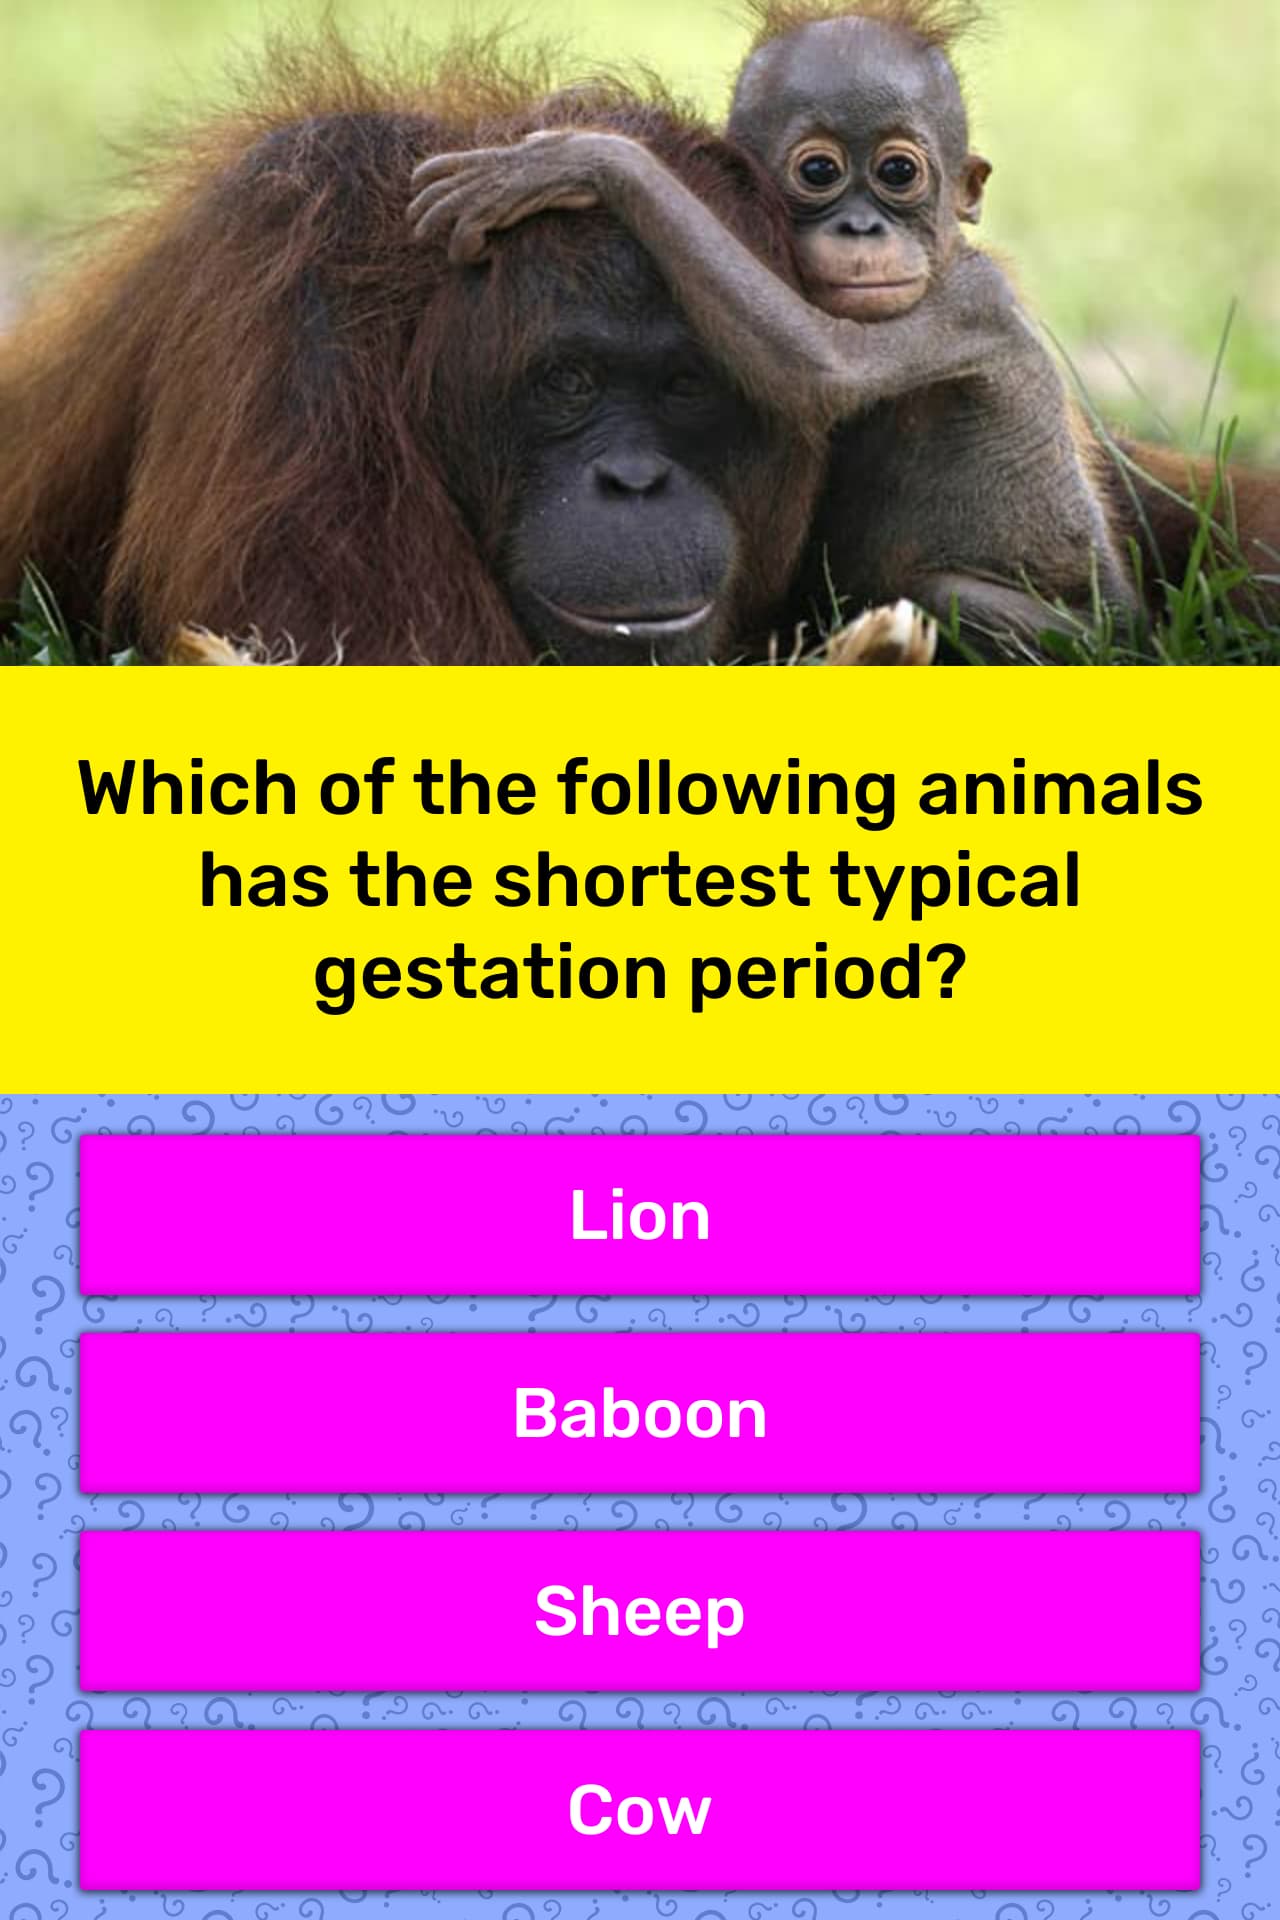 Which of the following animals has the shortest typical gestation period?